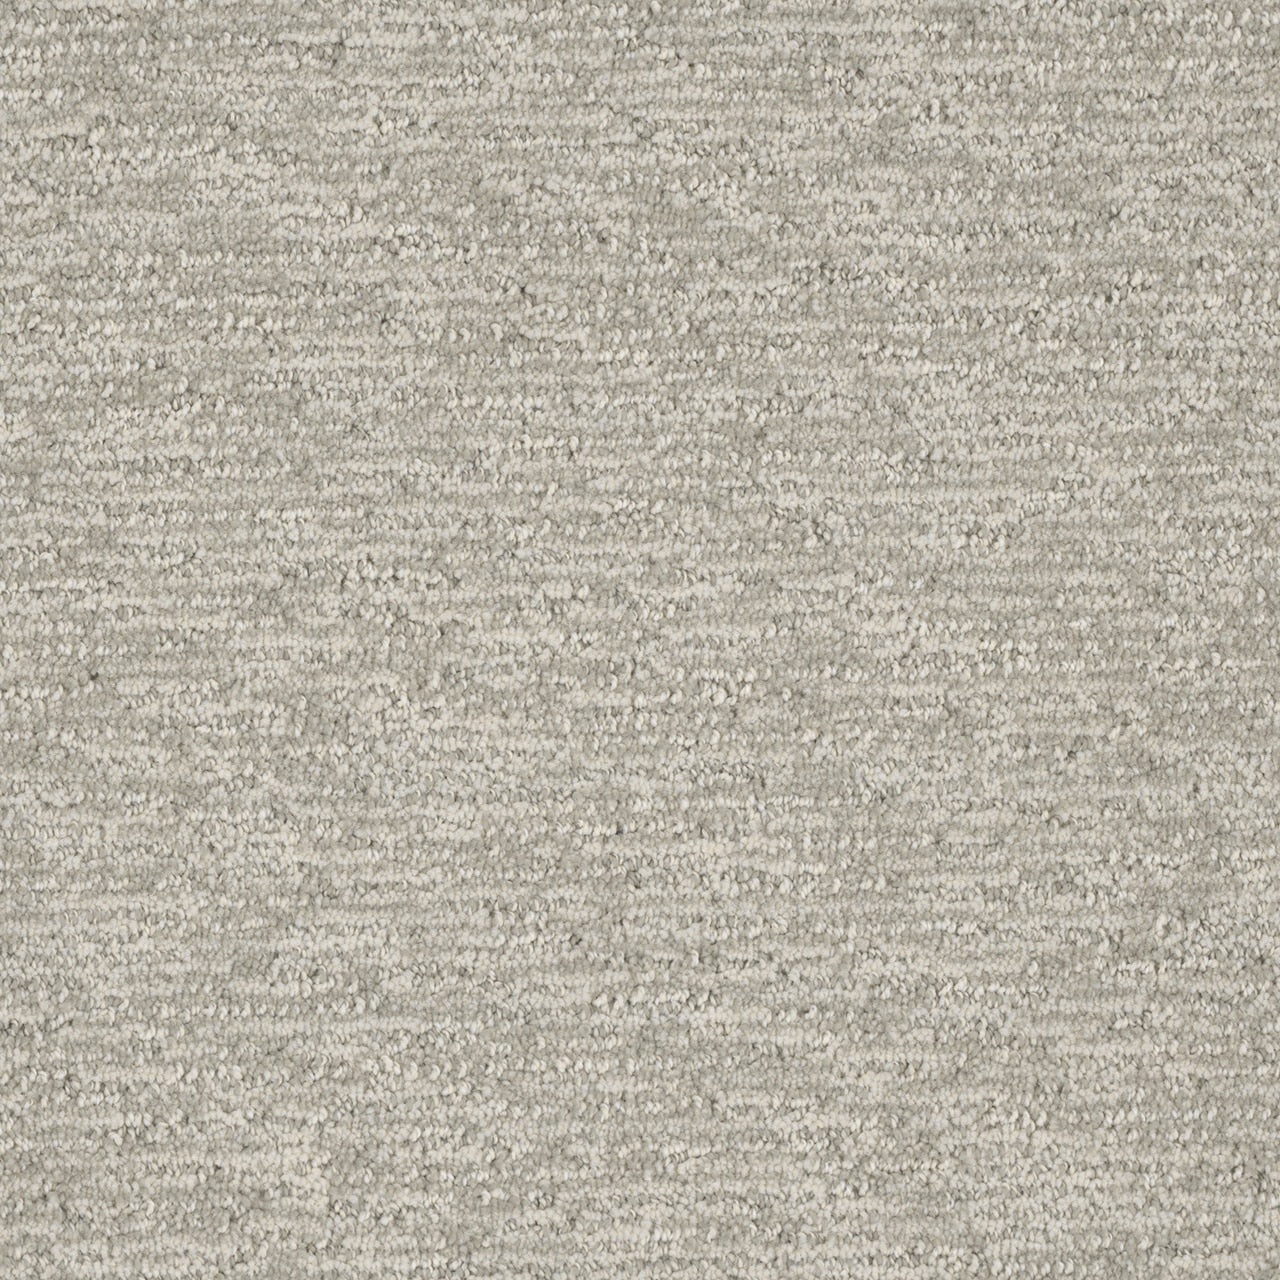 Patterned Carpet - Starting at $2.09/SF Finishing Touch (DreamWeaver) - col: Heirloom